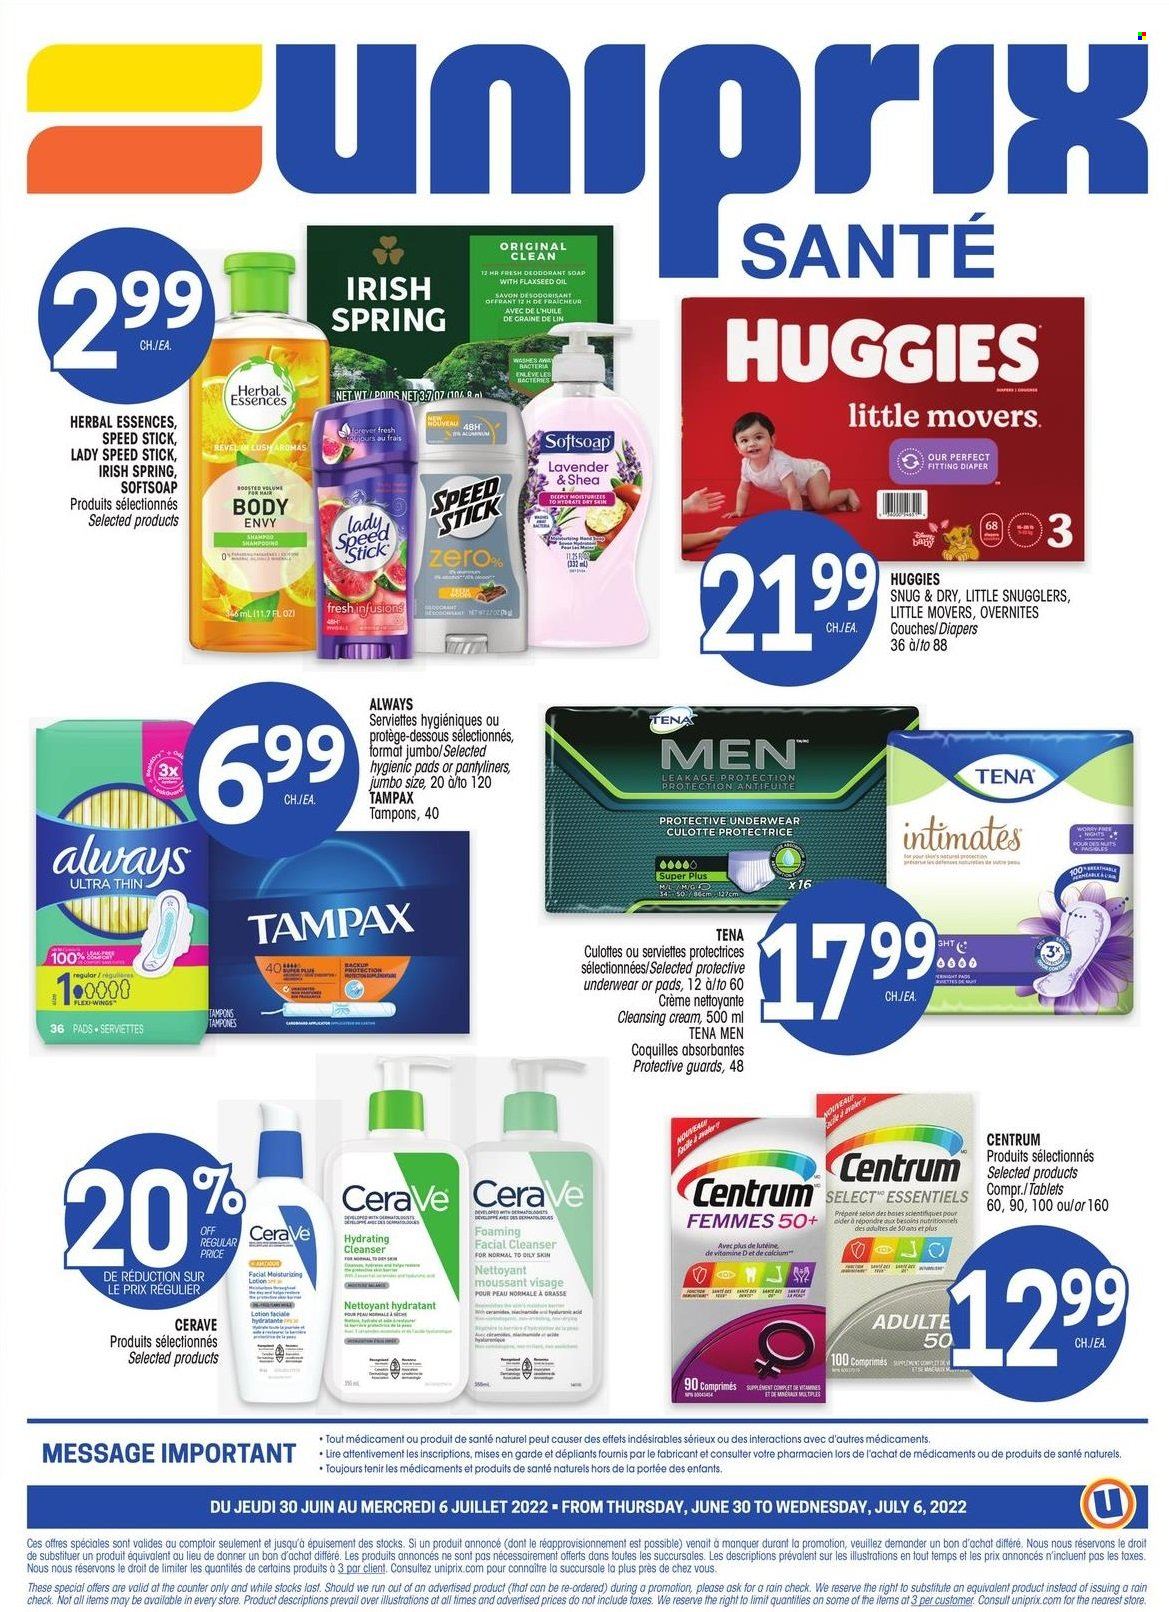 thumbnail - Uniprix Santé Flyer - June 30, 2022 - July 06, 2022 - Sales products - oil, nappies, Softsoap, soap, Always pads, pantyliners, tampons, CeraVe, cleanser, Herbal Essences, body lotion, anti-perspirant, Speed Stick, bag, Centrum, calcium, Tampax, Huggies, deodorant. Page 4.